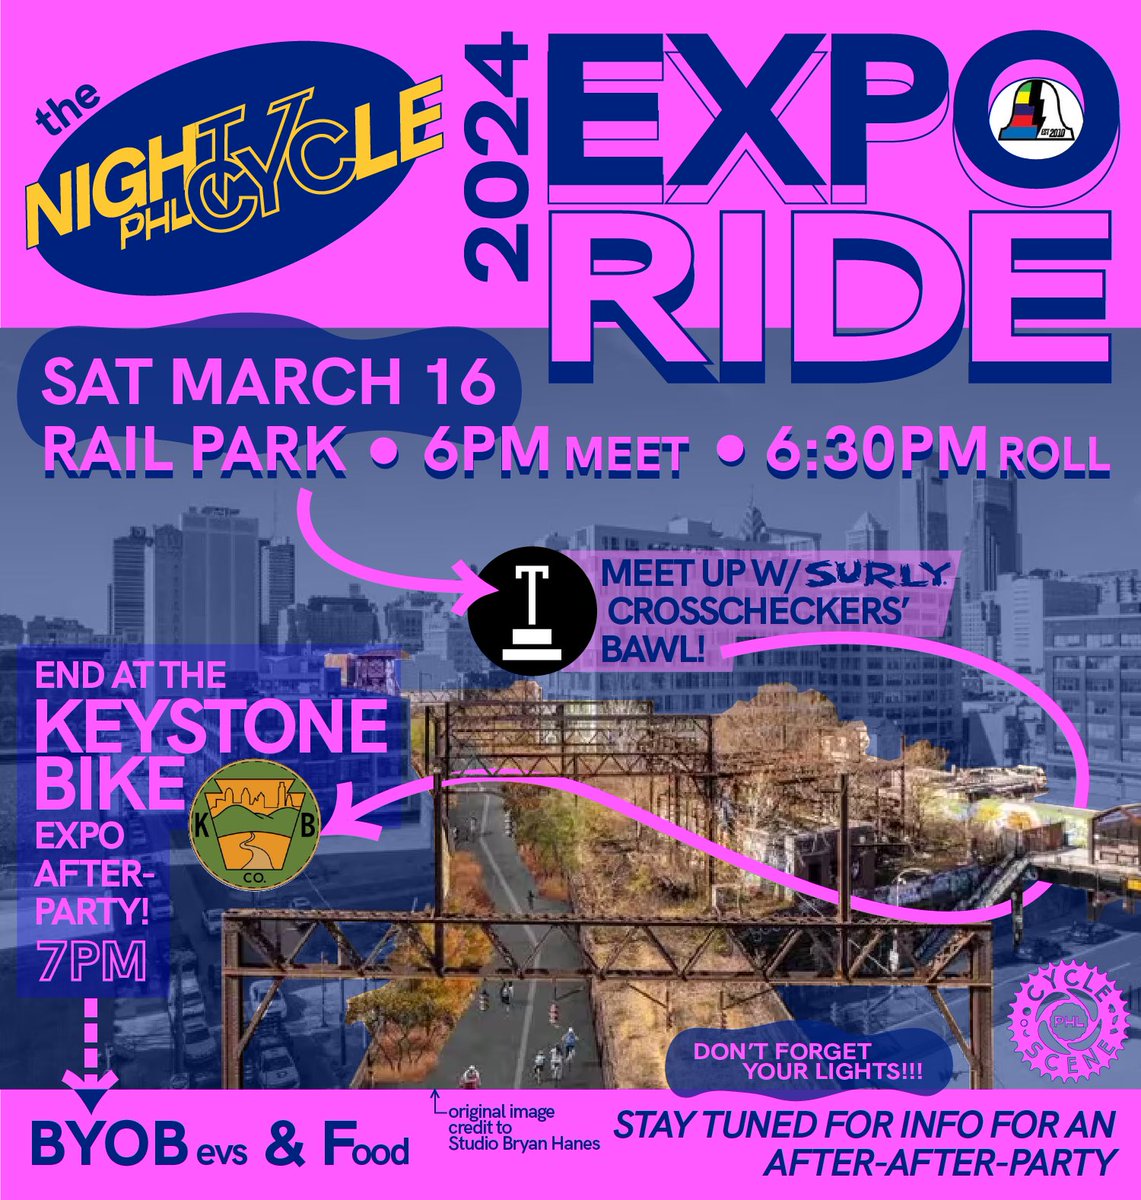 1 THING LEADS 2 ANOTHER: @PhillyBikeExpo RIDES: Cross Checkers’ Bawl 5:29 pm (Broad+Cherry) *T*H*E*N* merges w/ @nightcycle_phl (Broad+ Noble) for the Expo Ride 2 the Party.